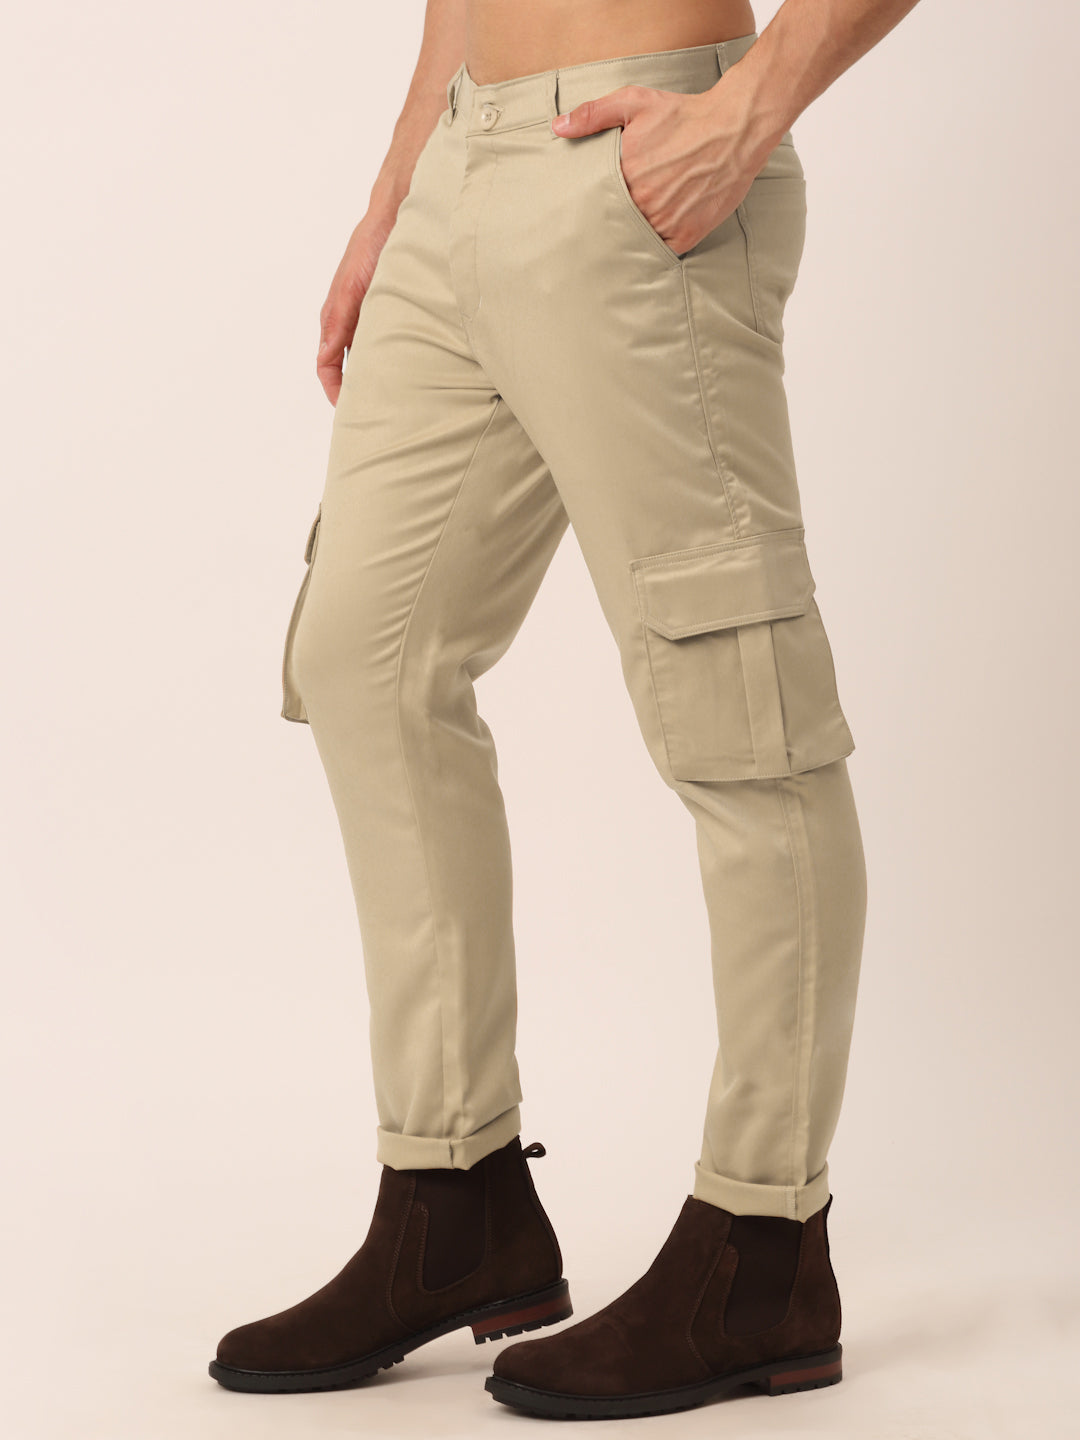 Buy Dockers Mens Relaxed Fit Cargo Pants Online India | Ubuy